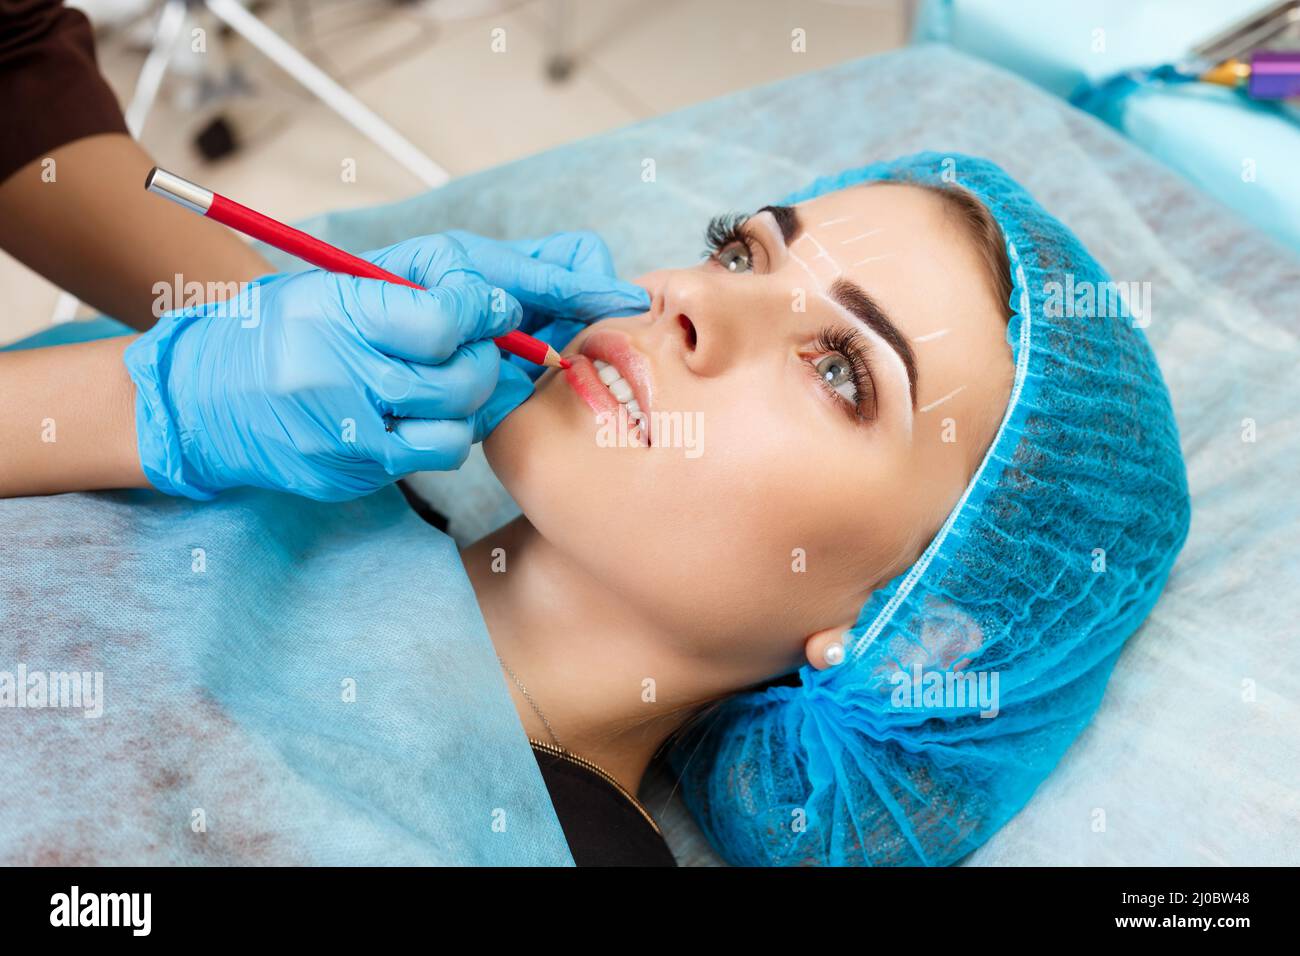 Cosmetologist making permanent makeup on woman's face Stock Photo